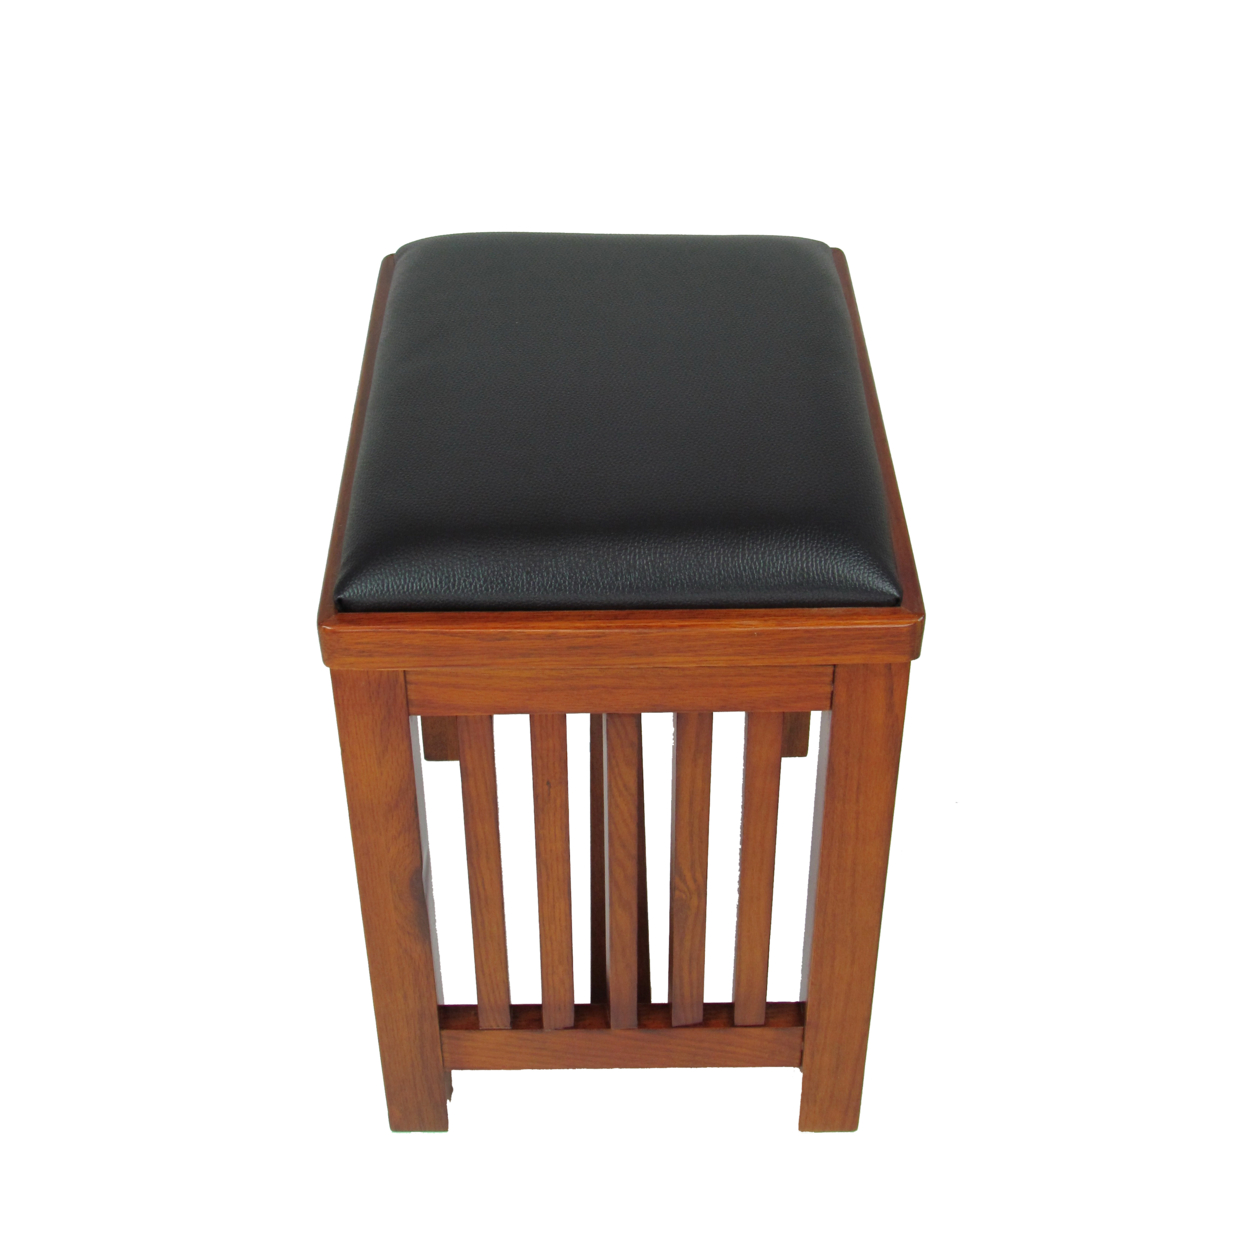 Faux Leather Upholstered Mission Wooden Stool With Slatted Sides, Brown- Saltoro Sherpi